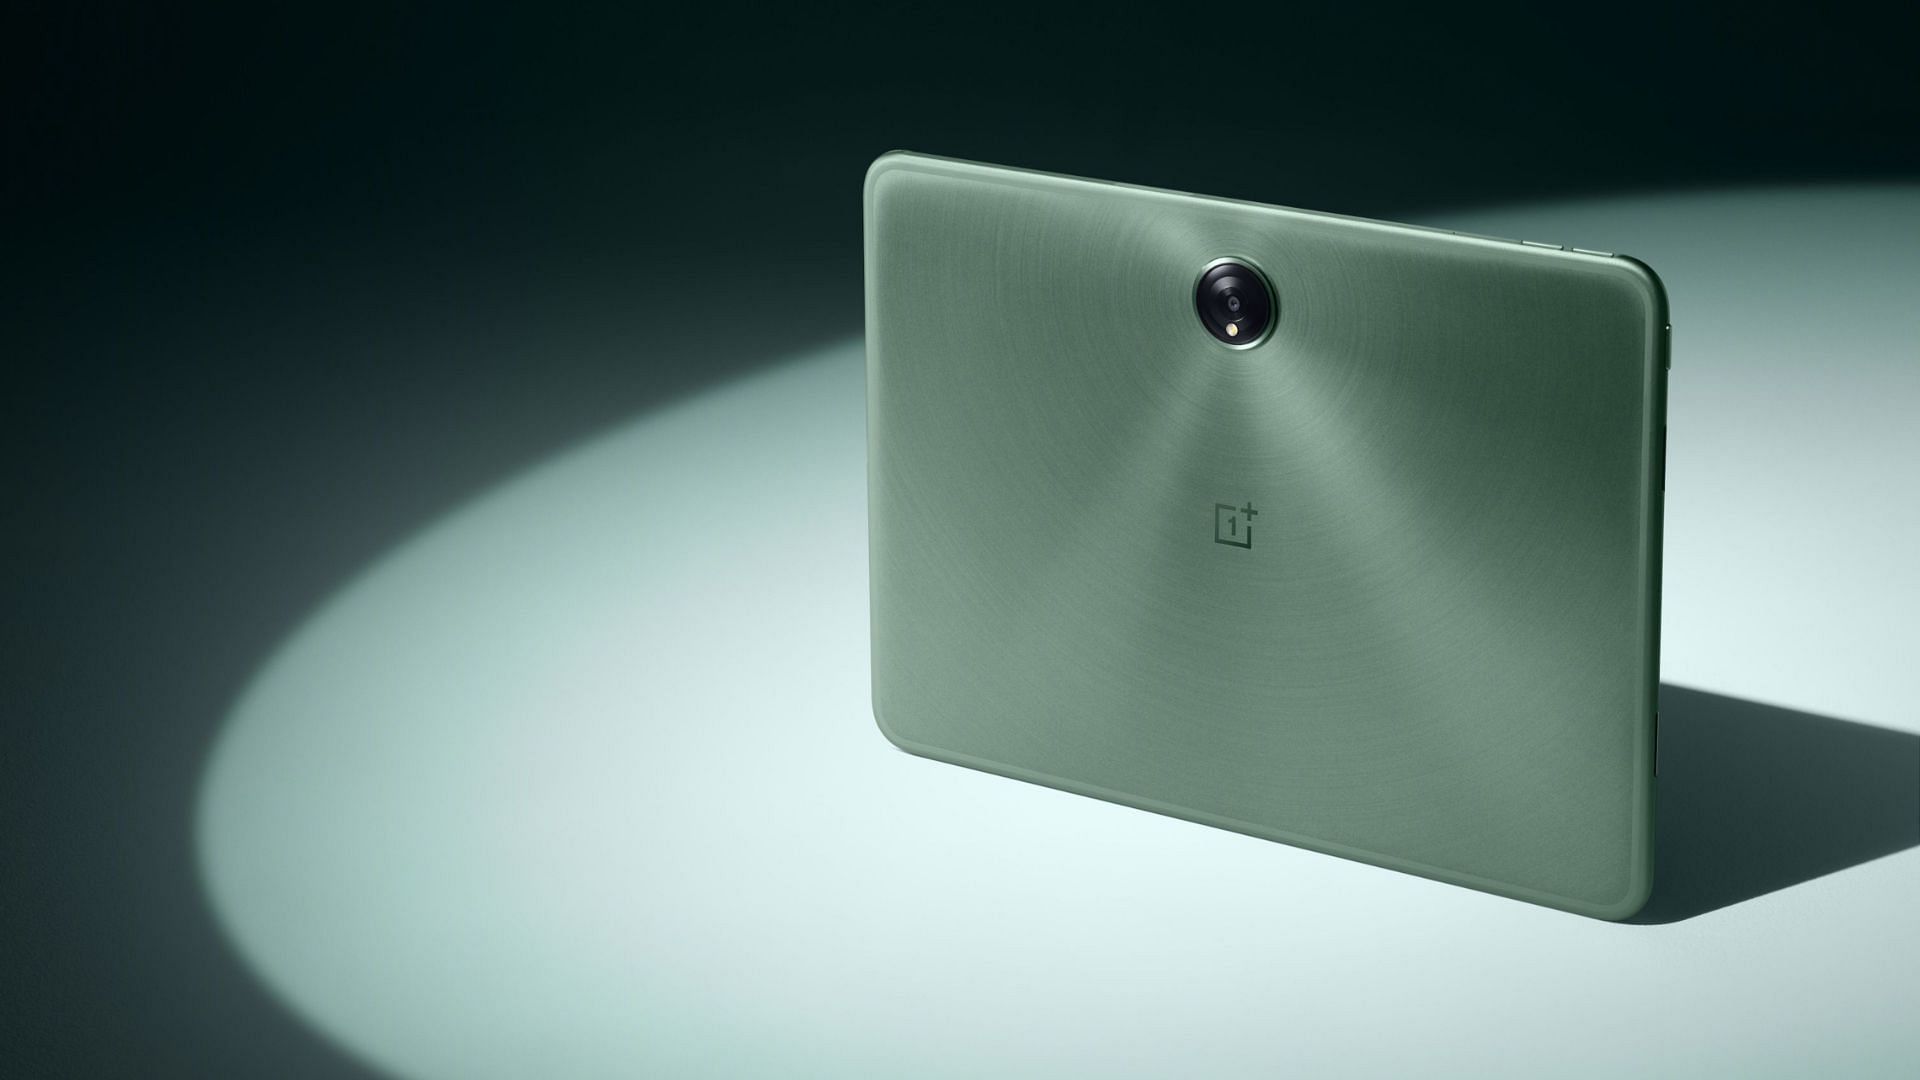 OnePlus Pad was showcased in tonight